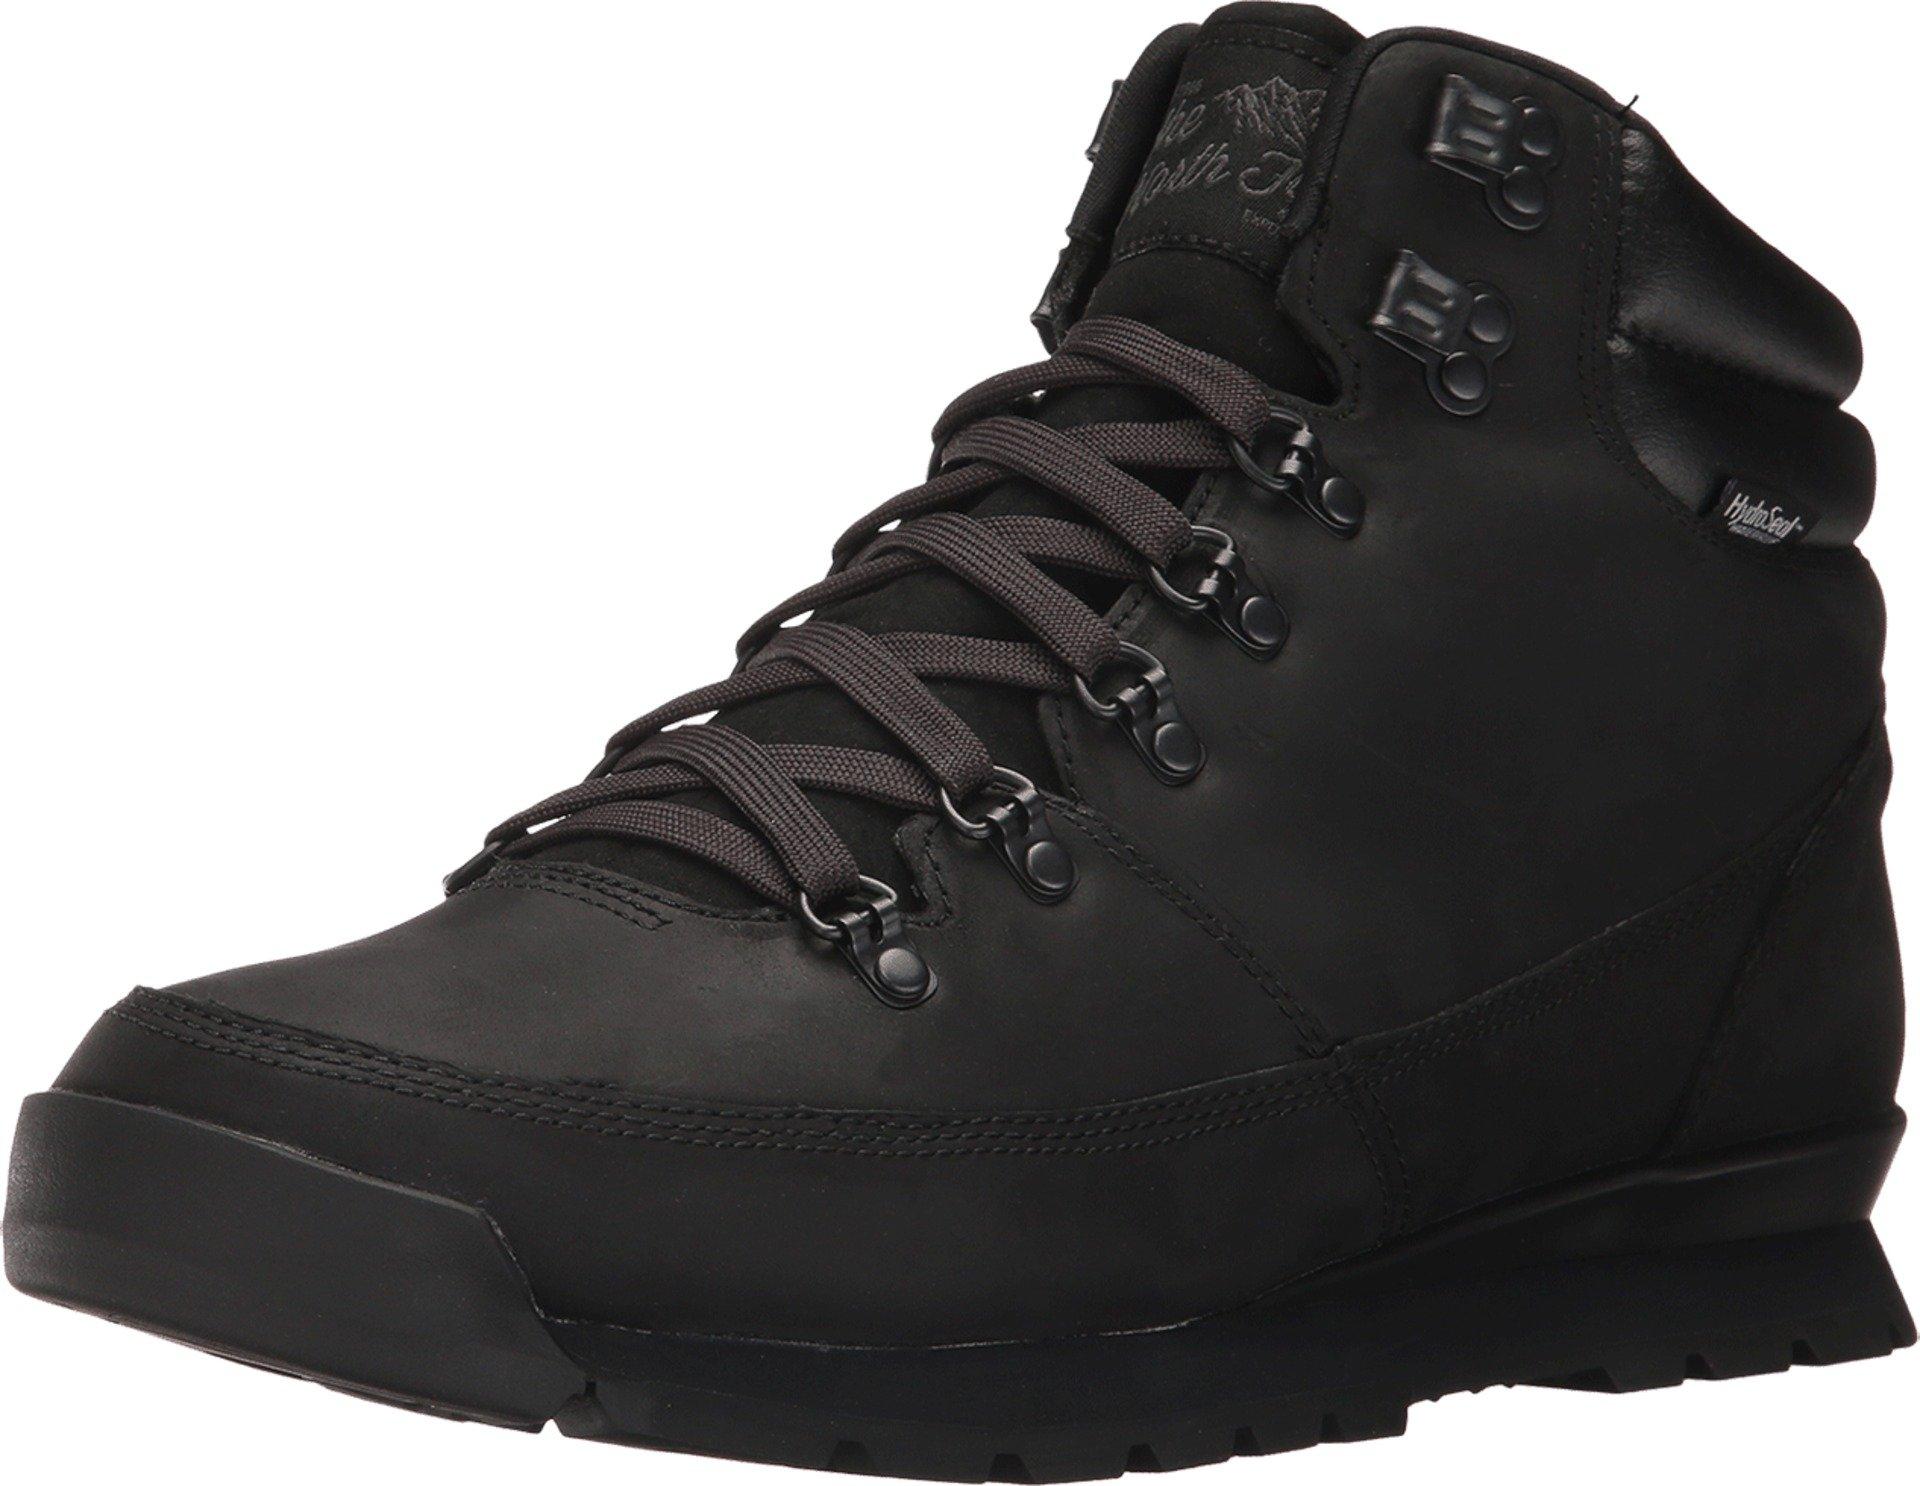 The North Face Back-to-berkeley Redux Leather in Black for Men - Lyst